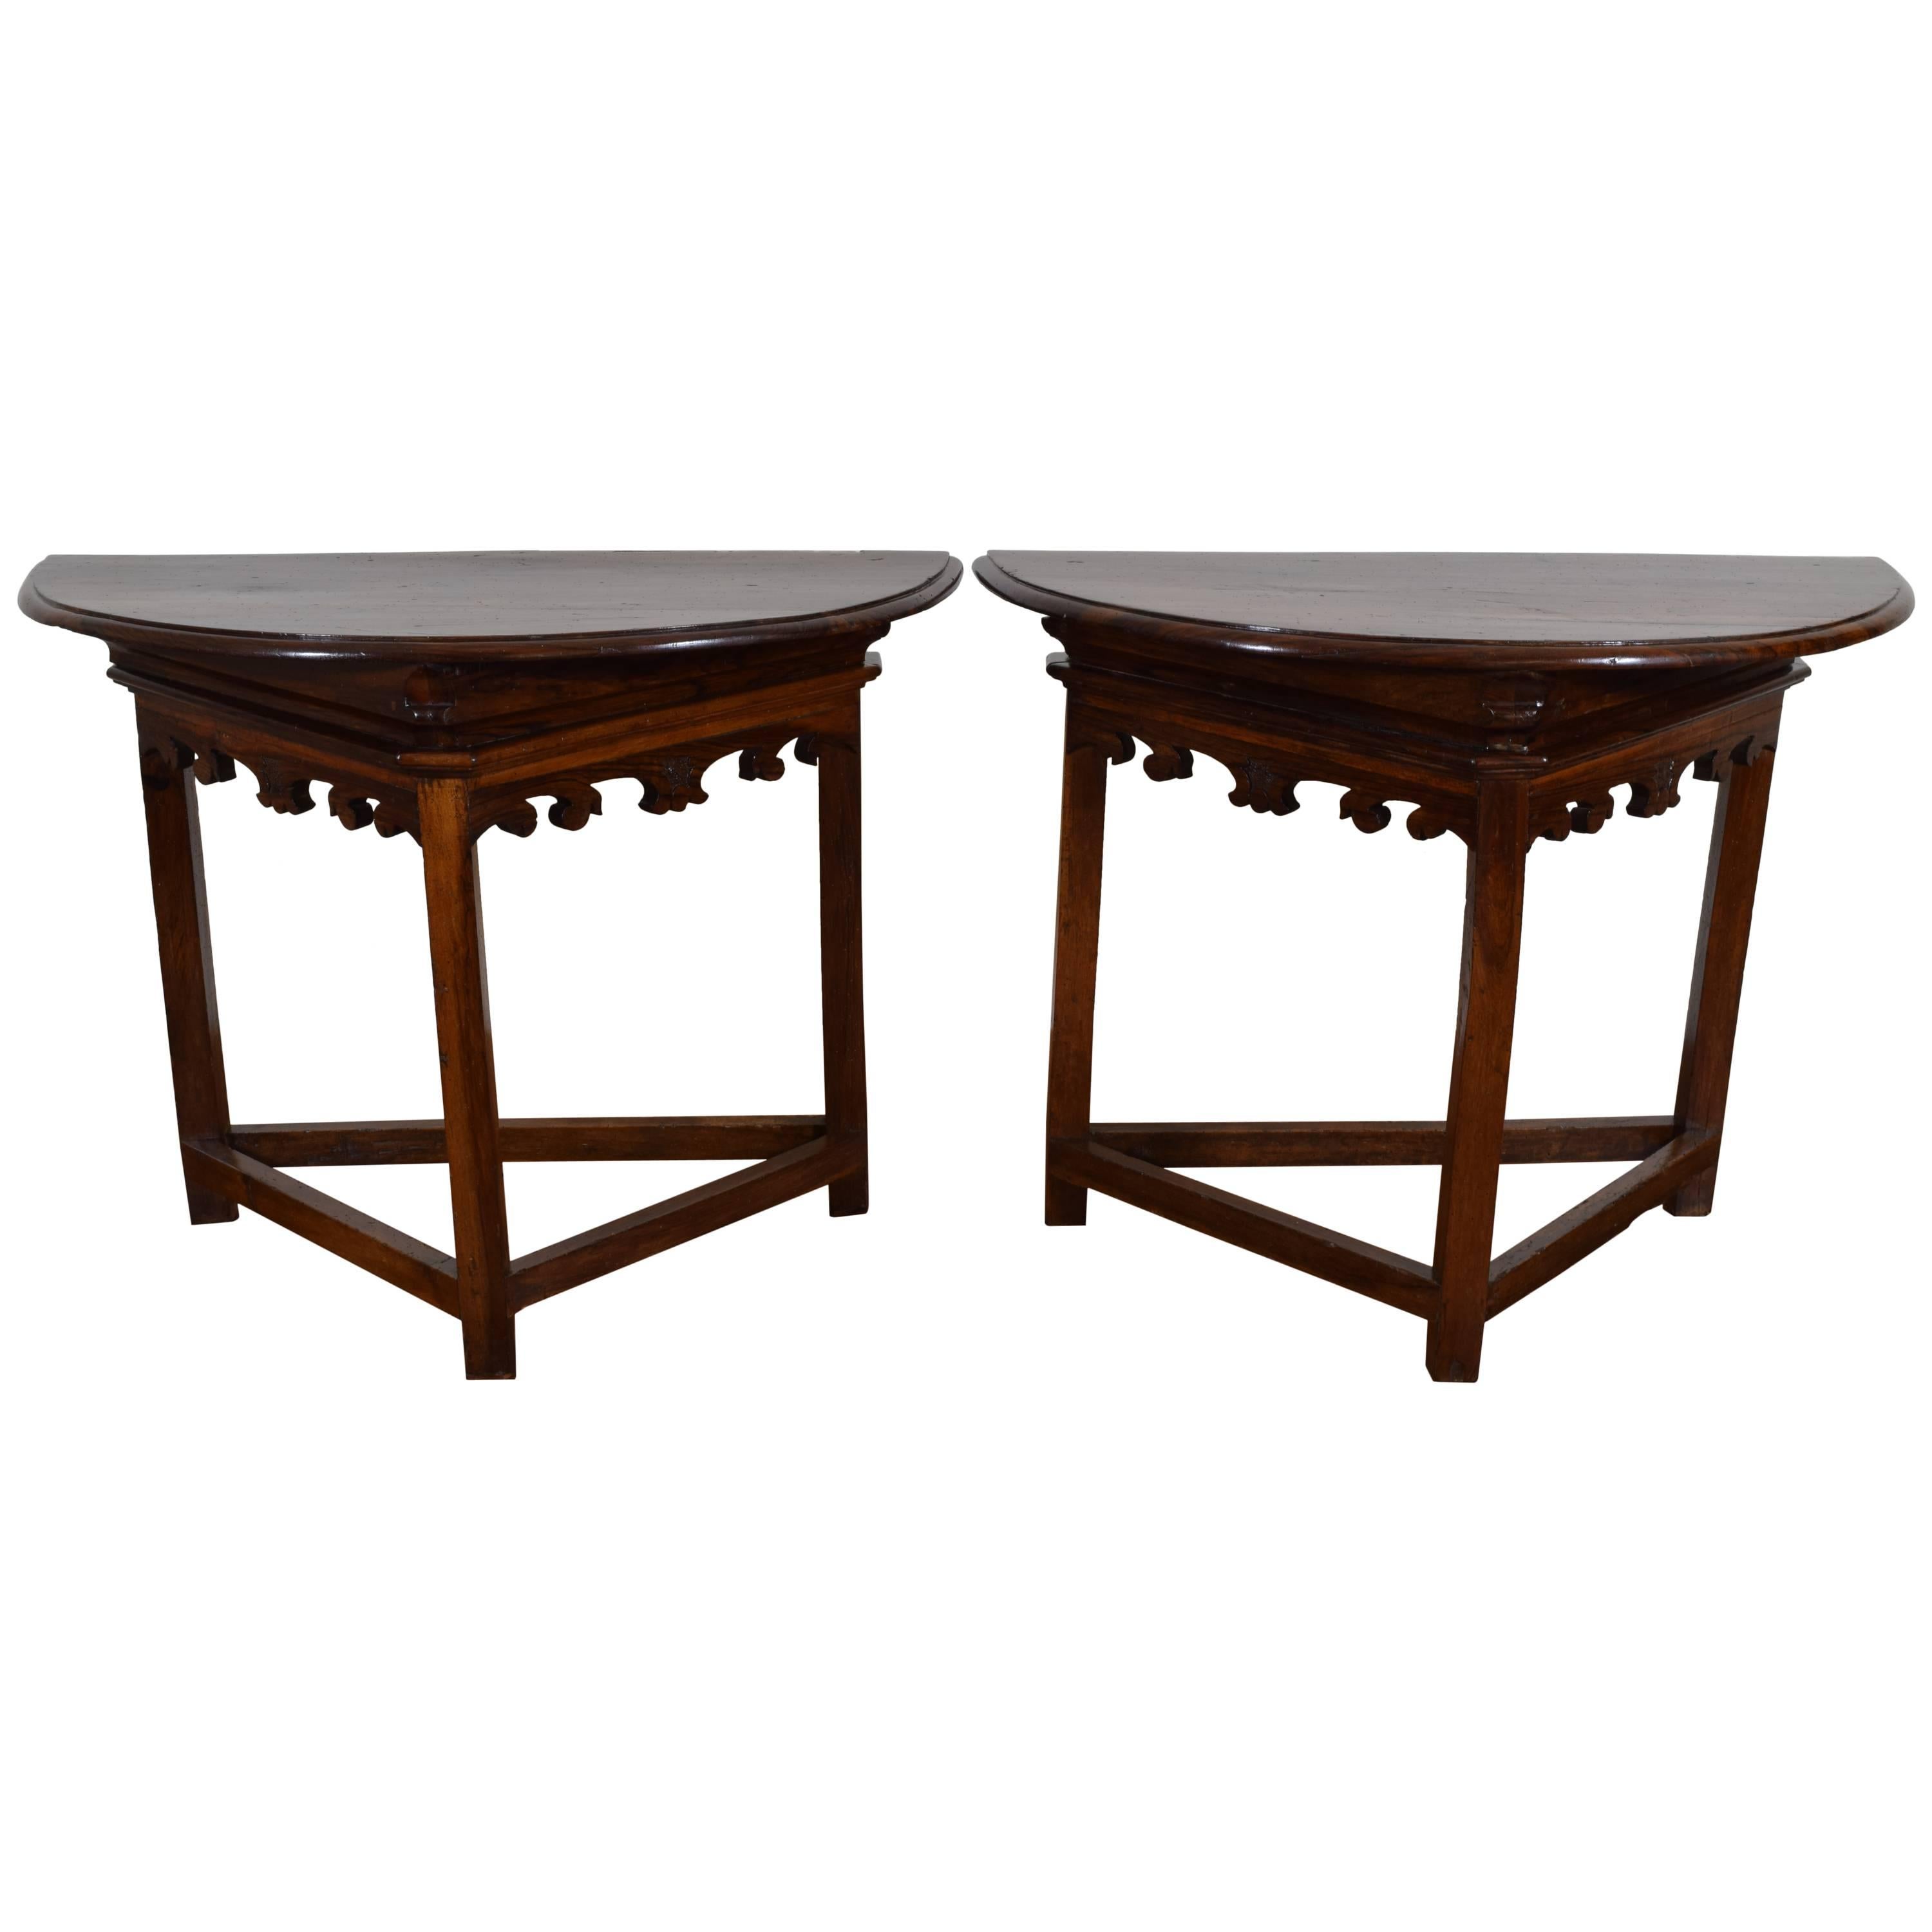 Pair of Italian, Emiliana, Carved Demilune Console Tables, 19th Century